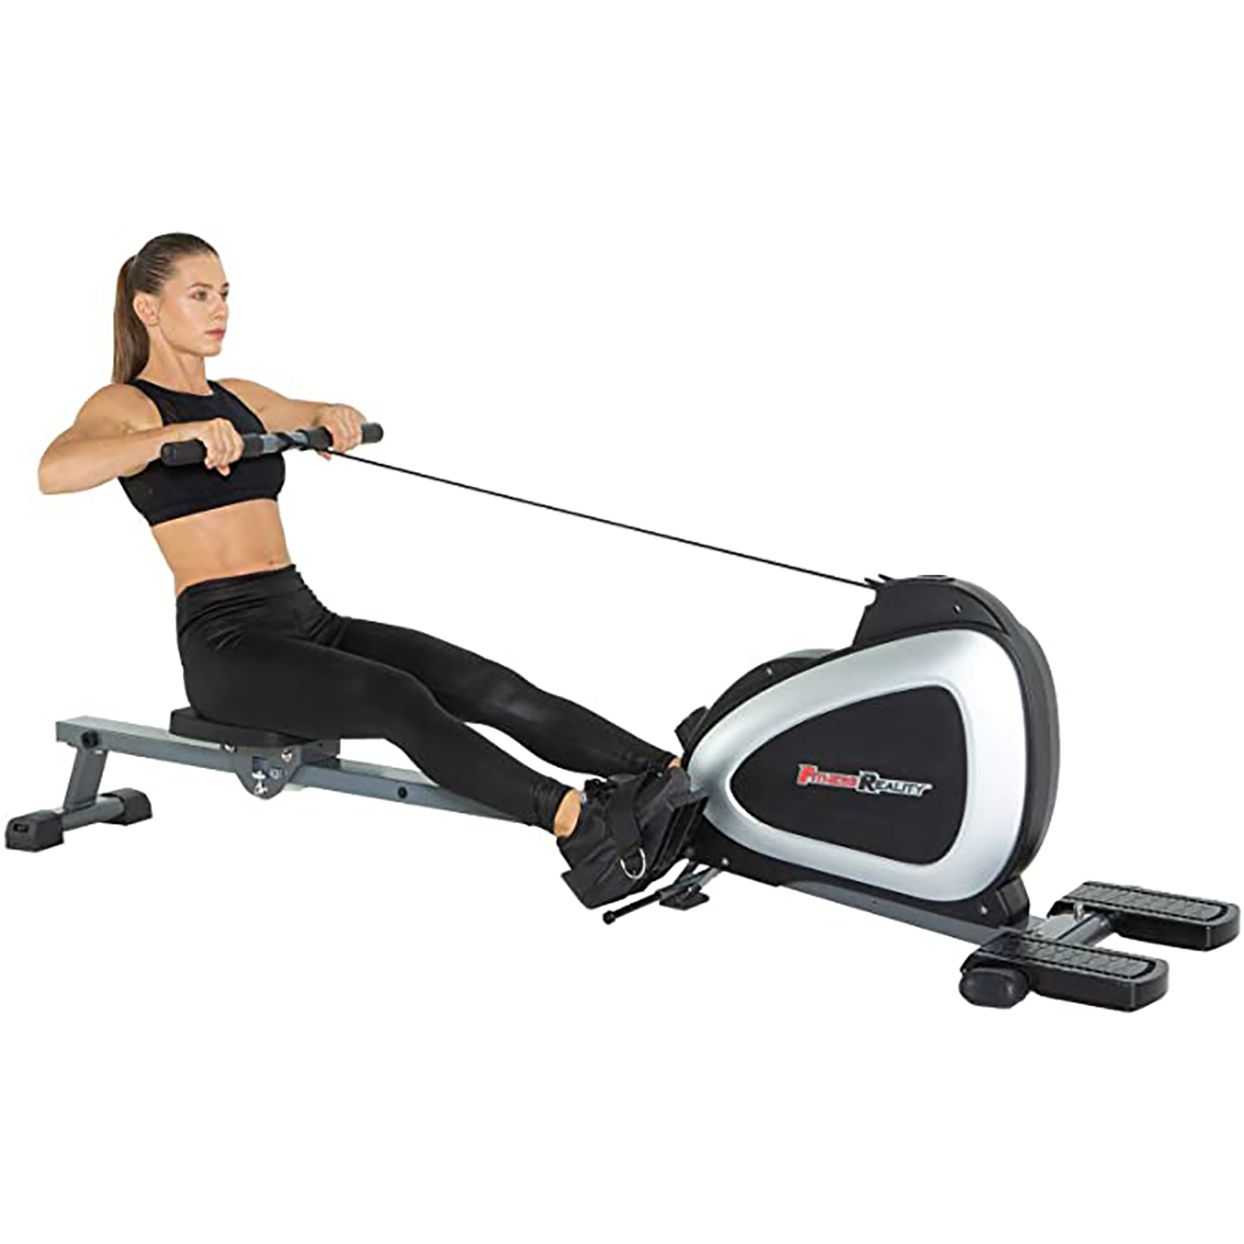 home rowing machine fitness reality